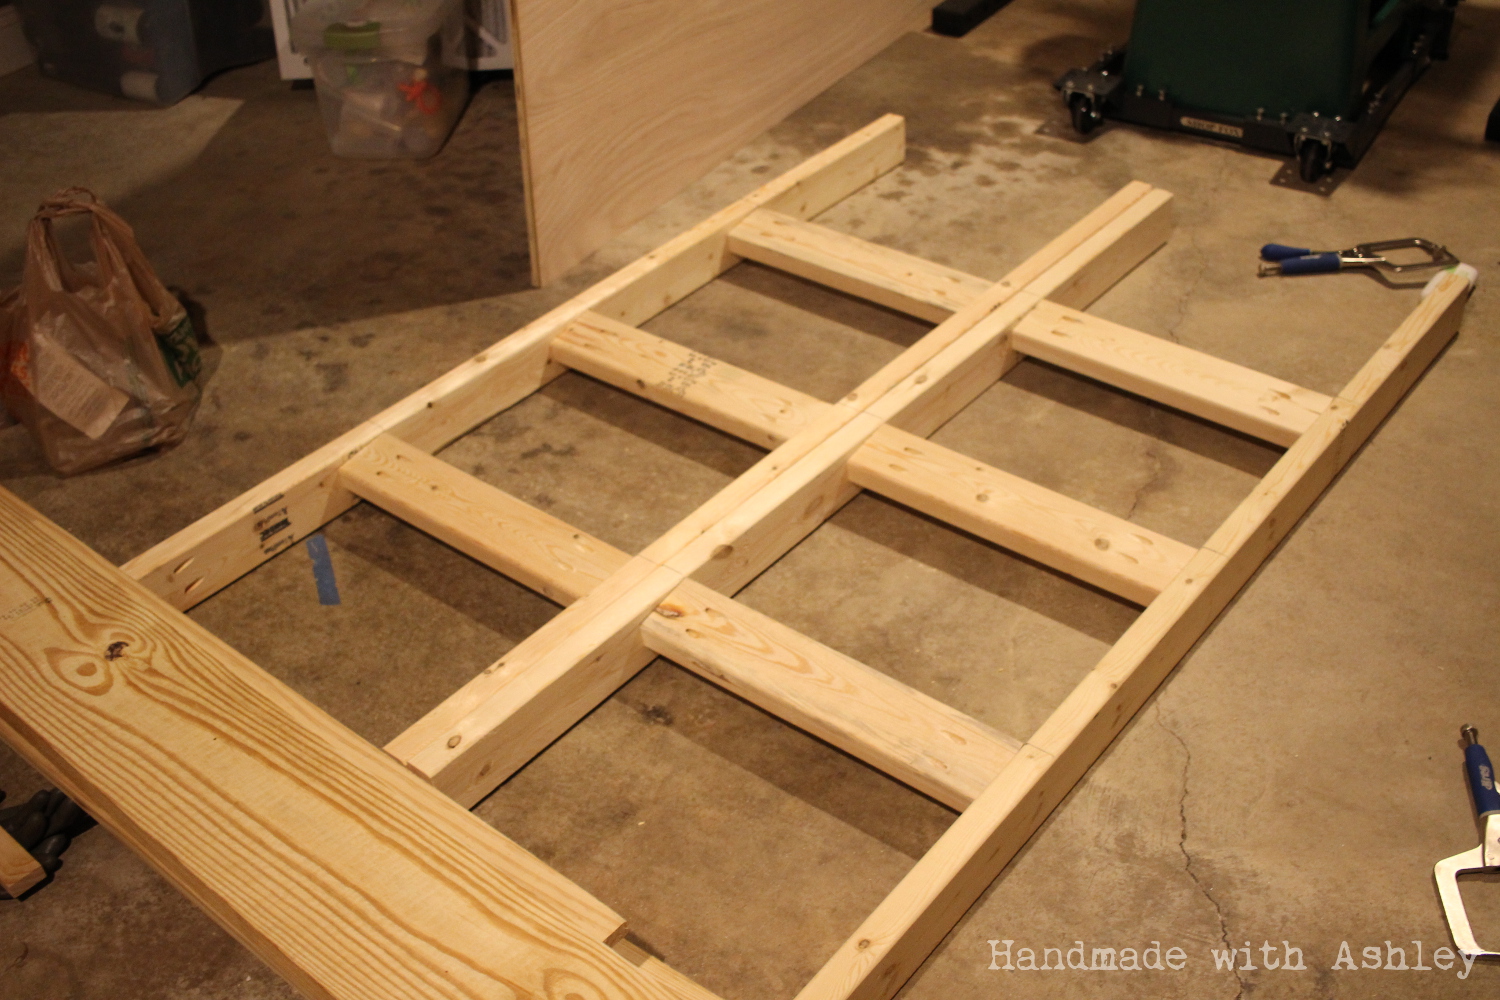 DIY Mobile Lumber Rack | Do It Yourself Home Projects from Ana White